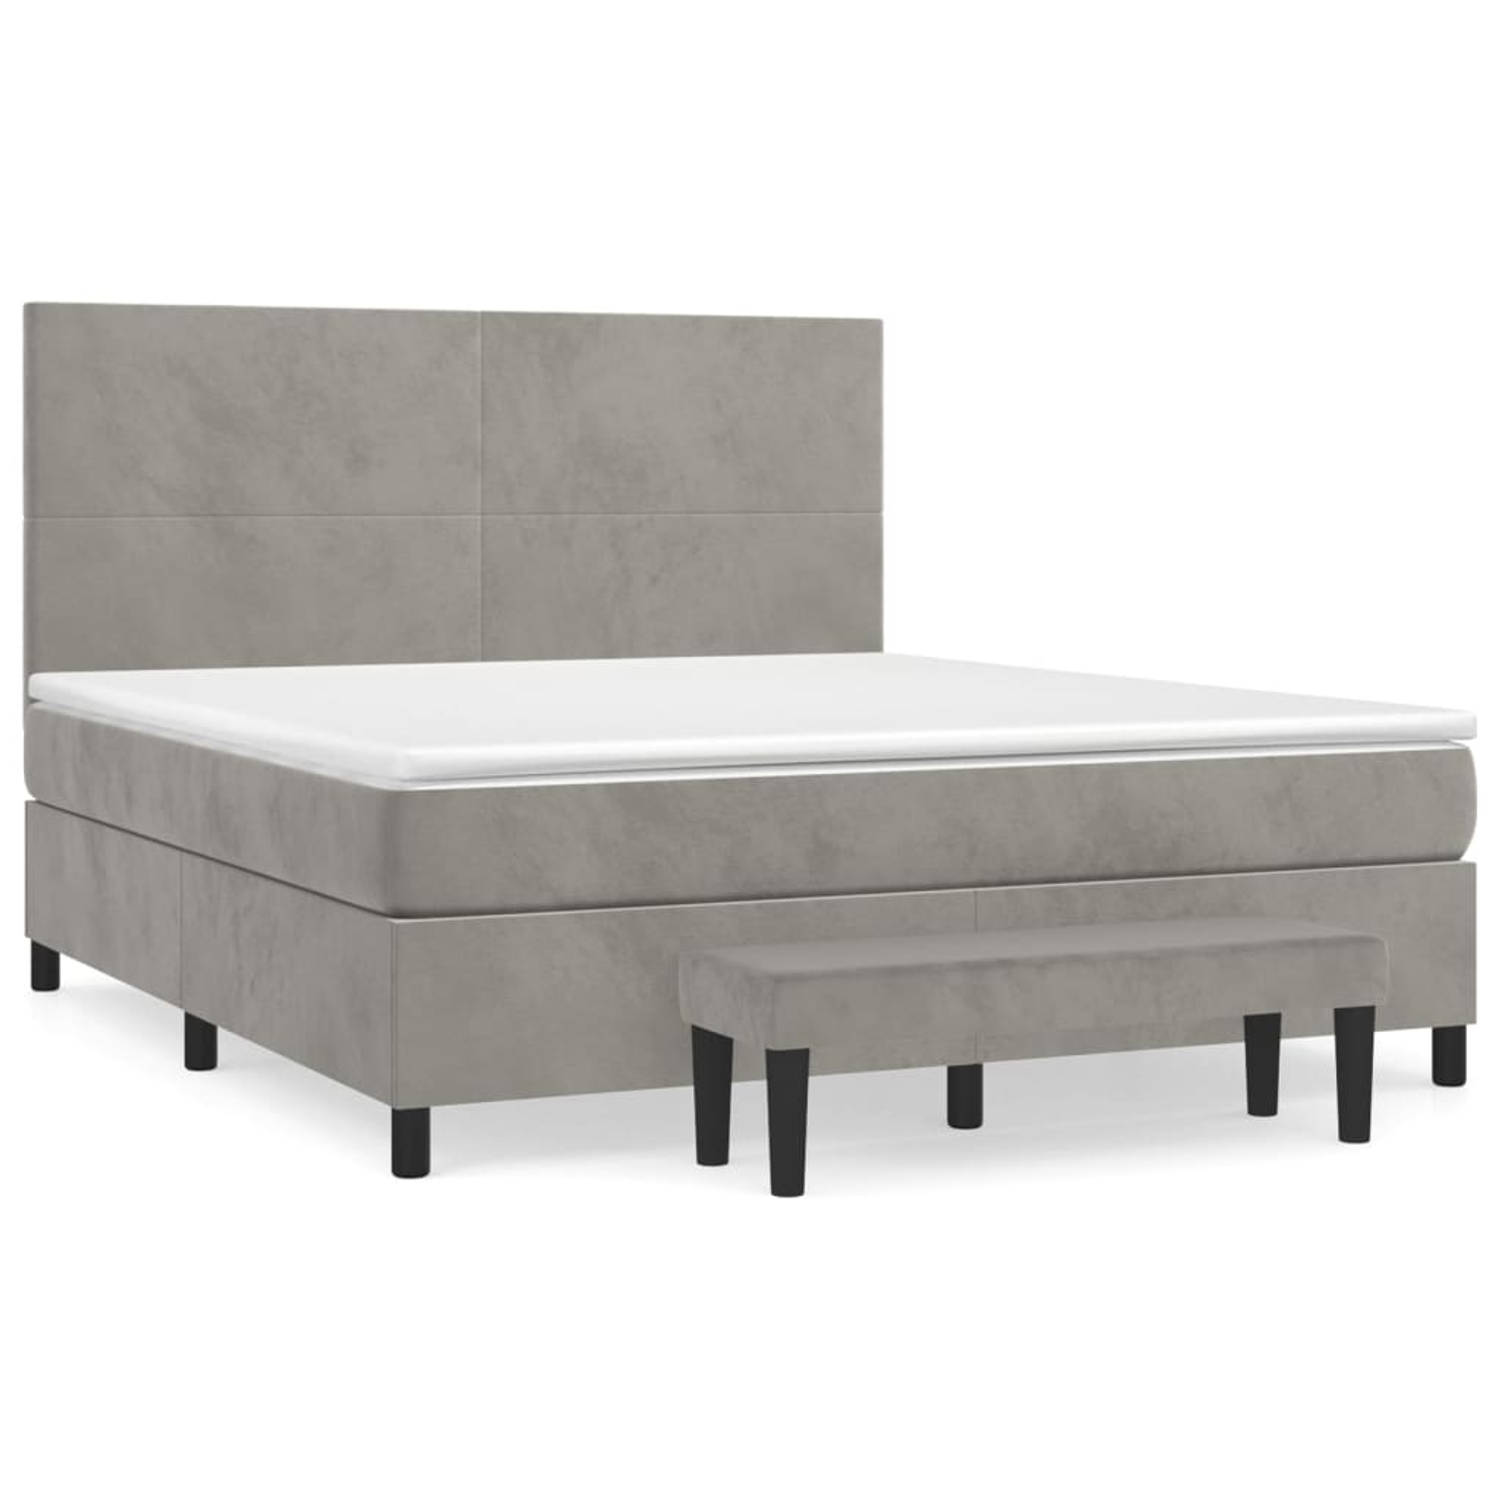 The Living Store Bed - The Living Store - Boxspringbed - 203 x 160 x 118/128 cm - Lichtgrijs